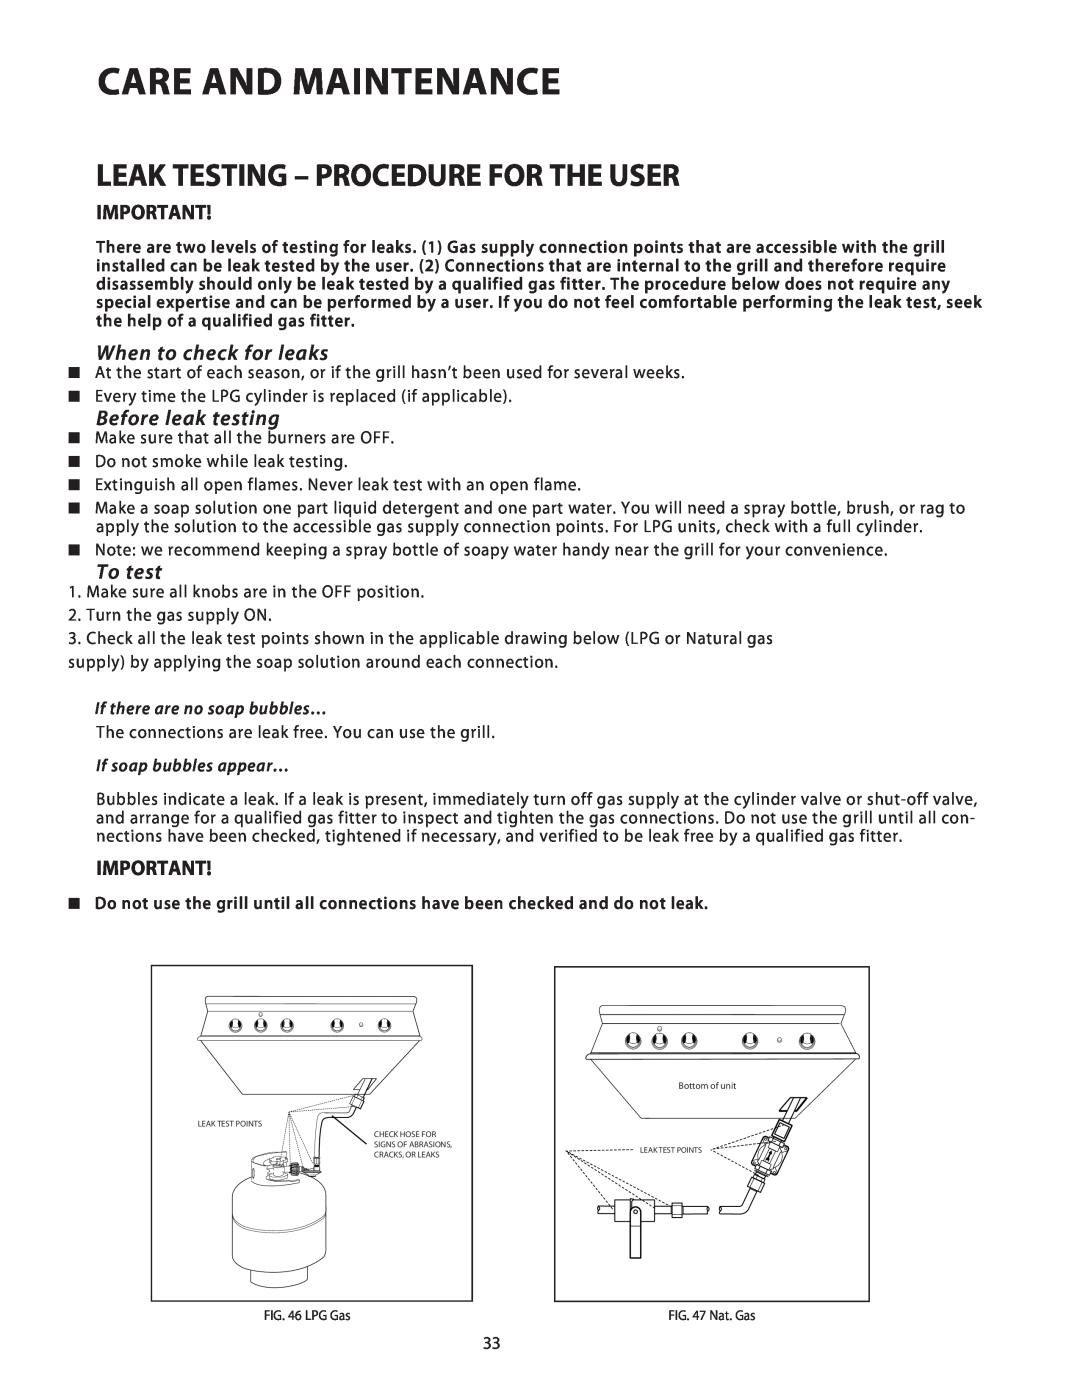 Fisher & Paykel BGB48, BGB36 Leak Testing - Procedure For The User, When to check for leaks, Before leak testing, To test 